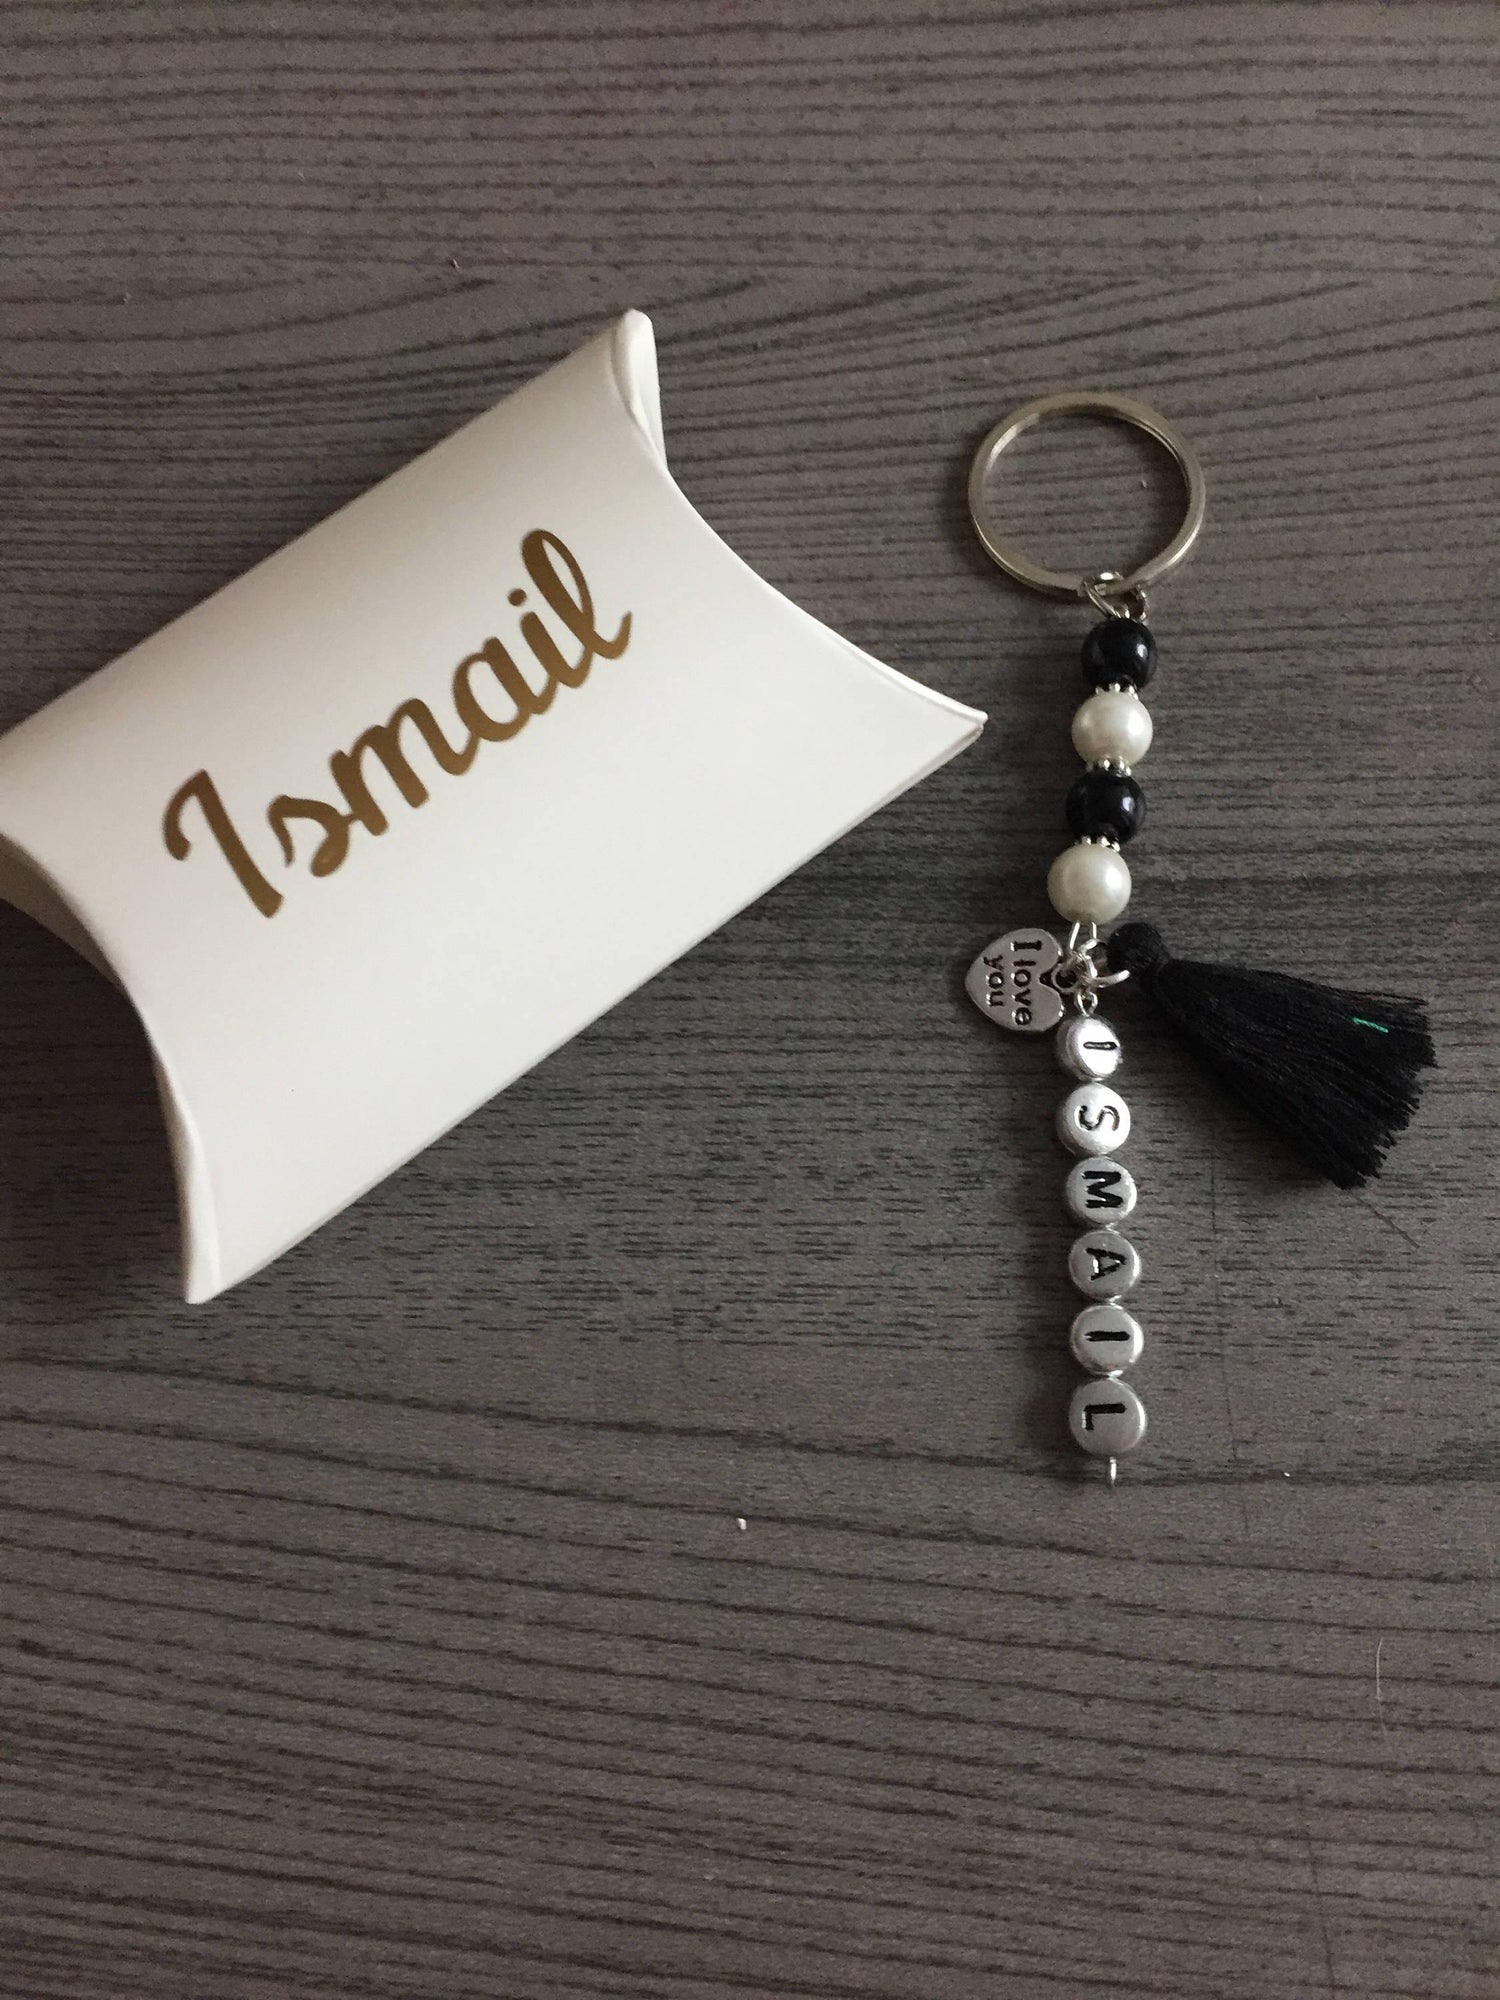 Personalized pearled keychain (incl box) - Unique Tasbihs & Gifts